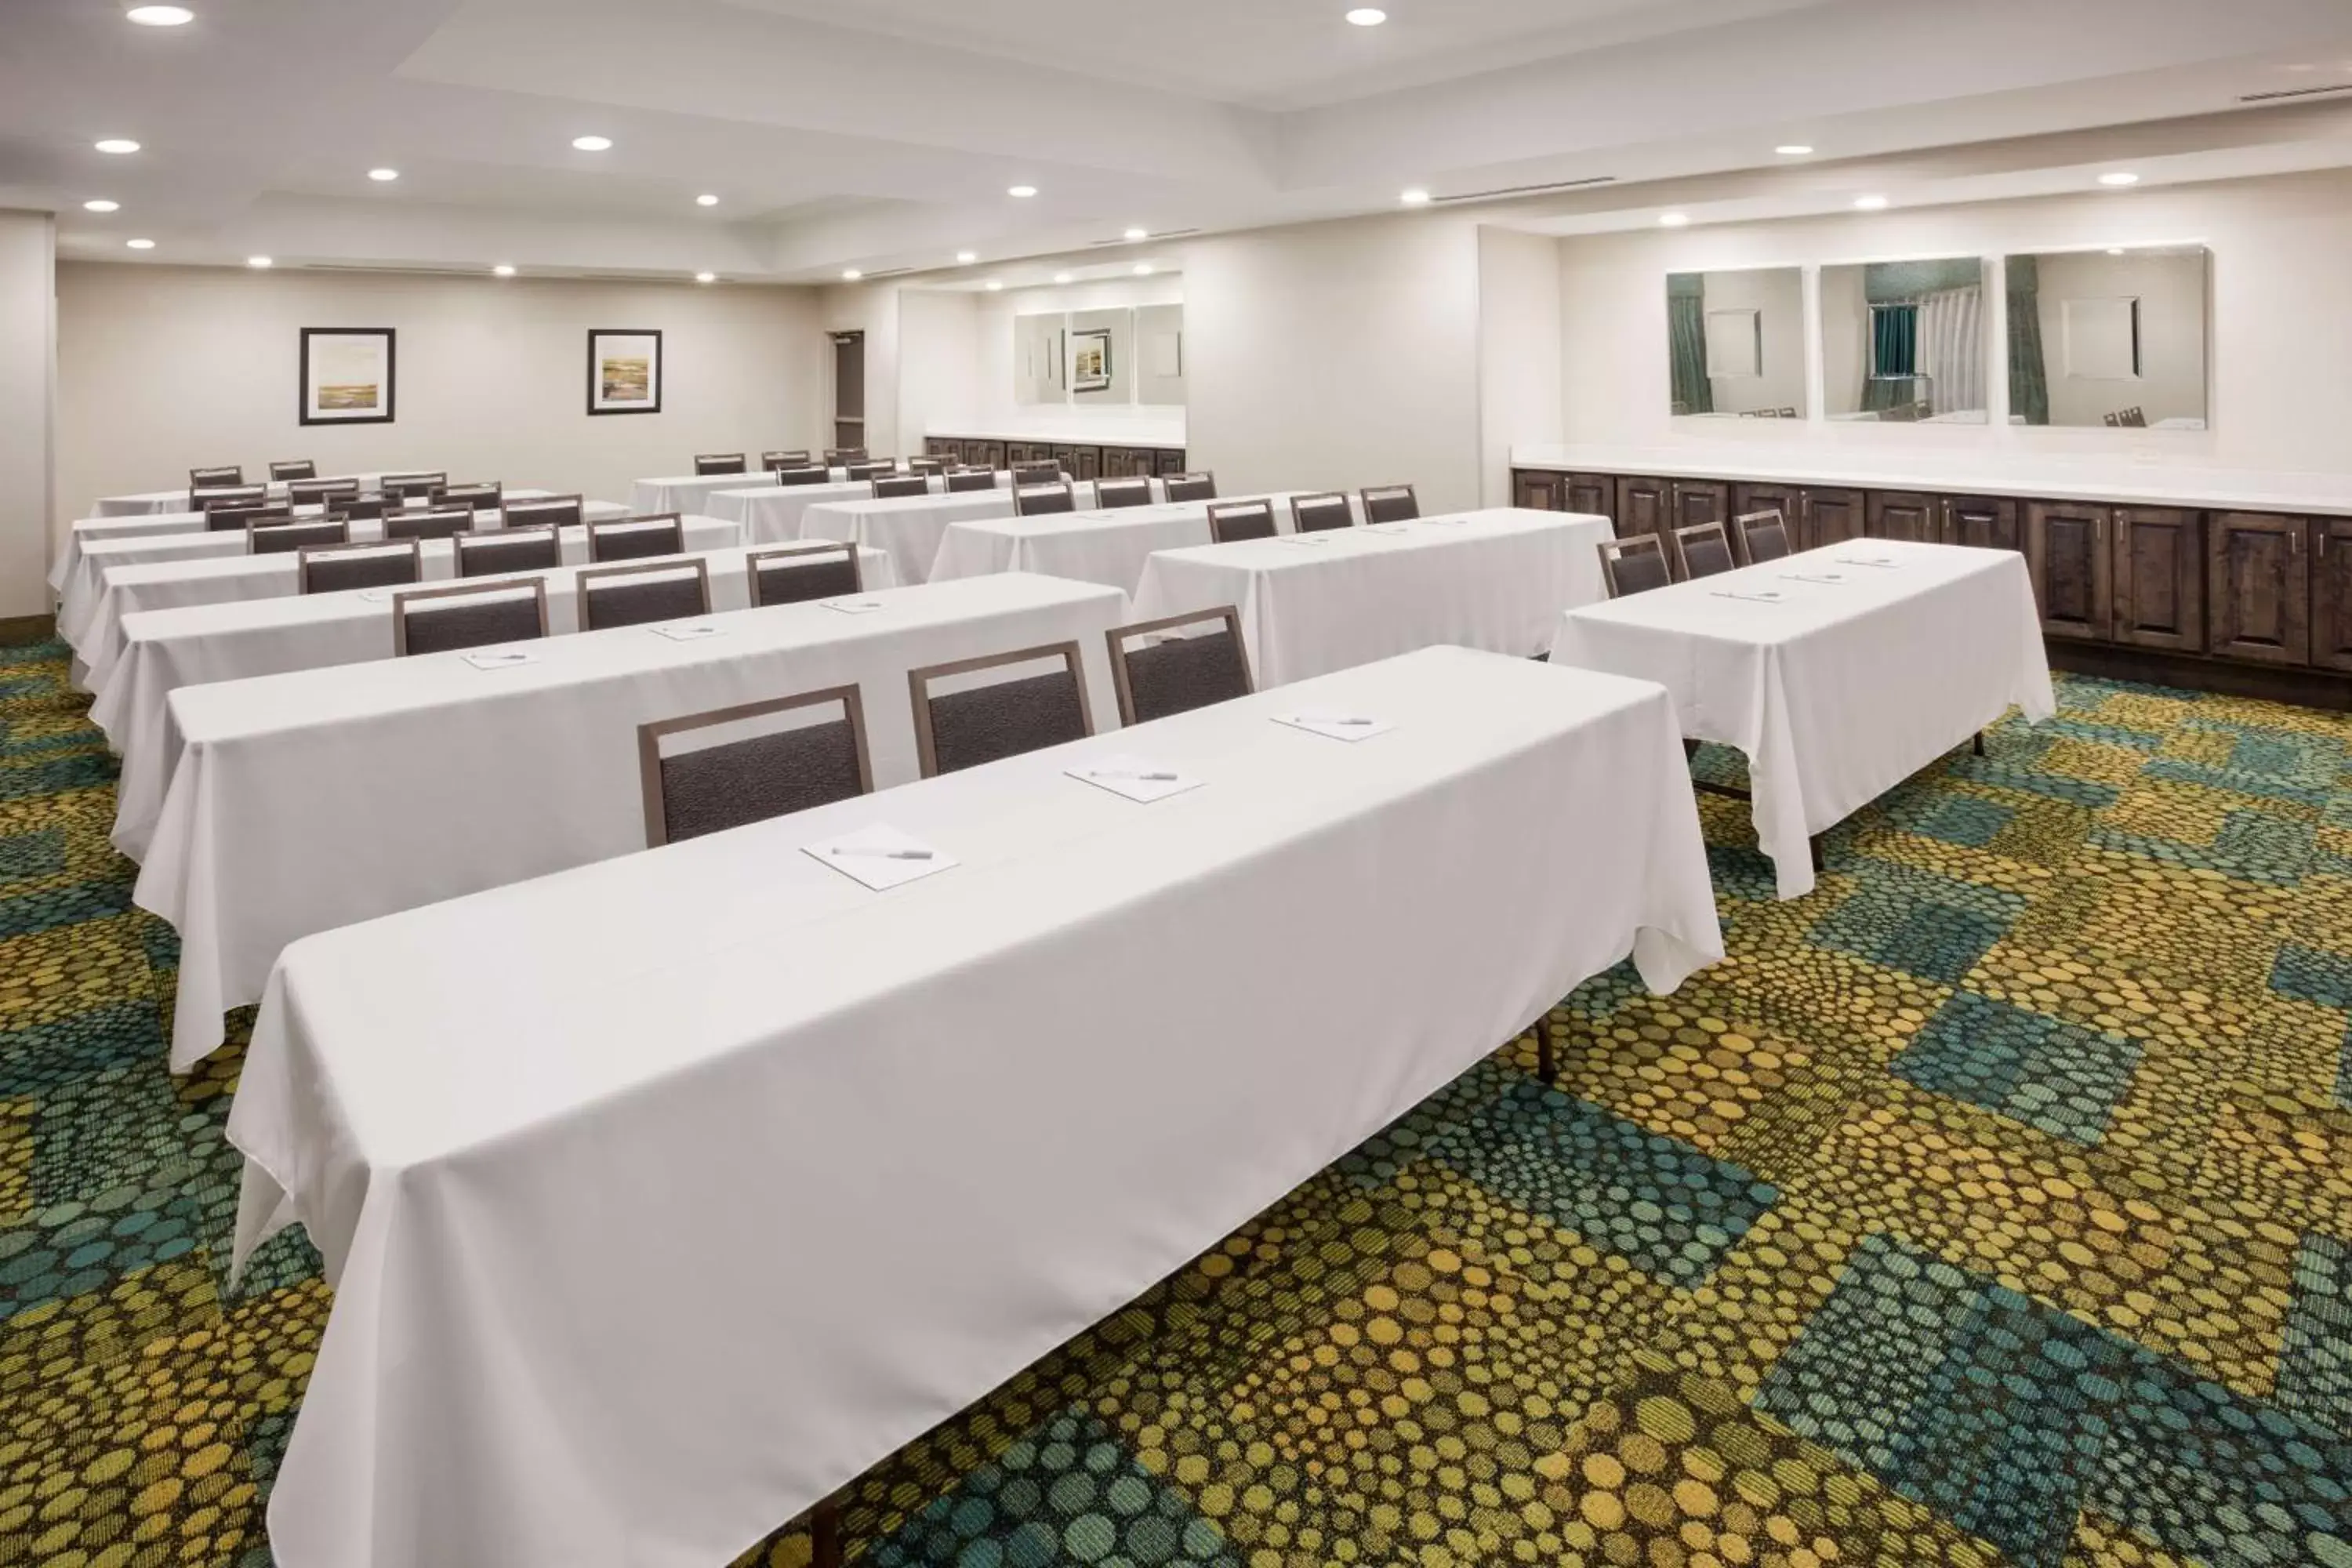 Meeting/conference room in Hampton Inn & Suites Sioux City South, IA